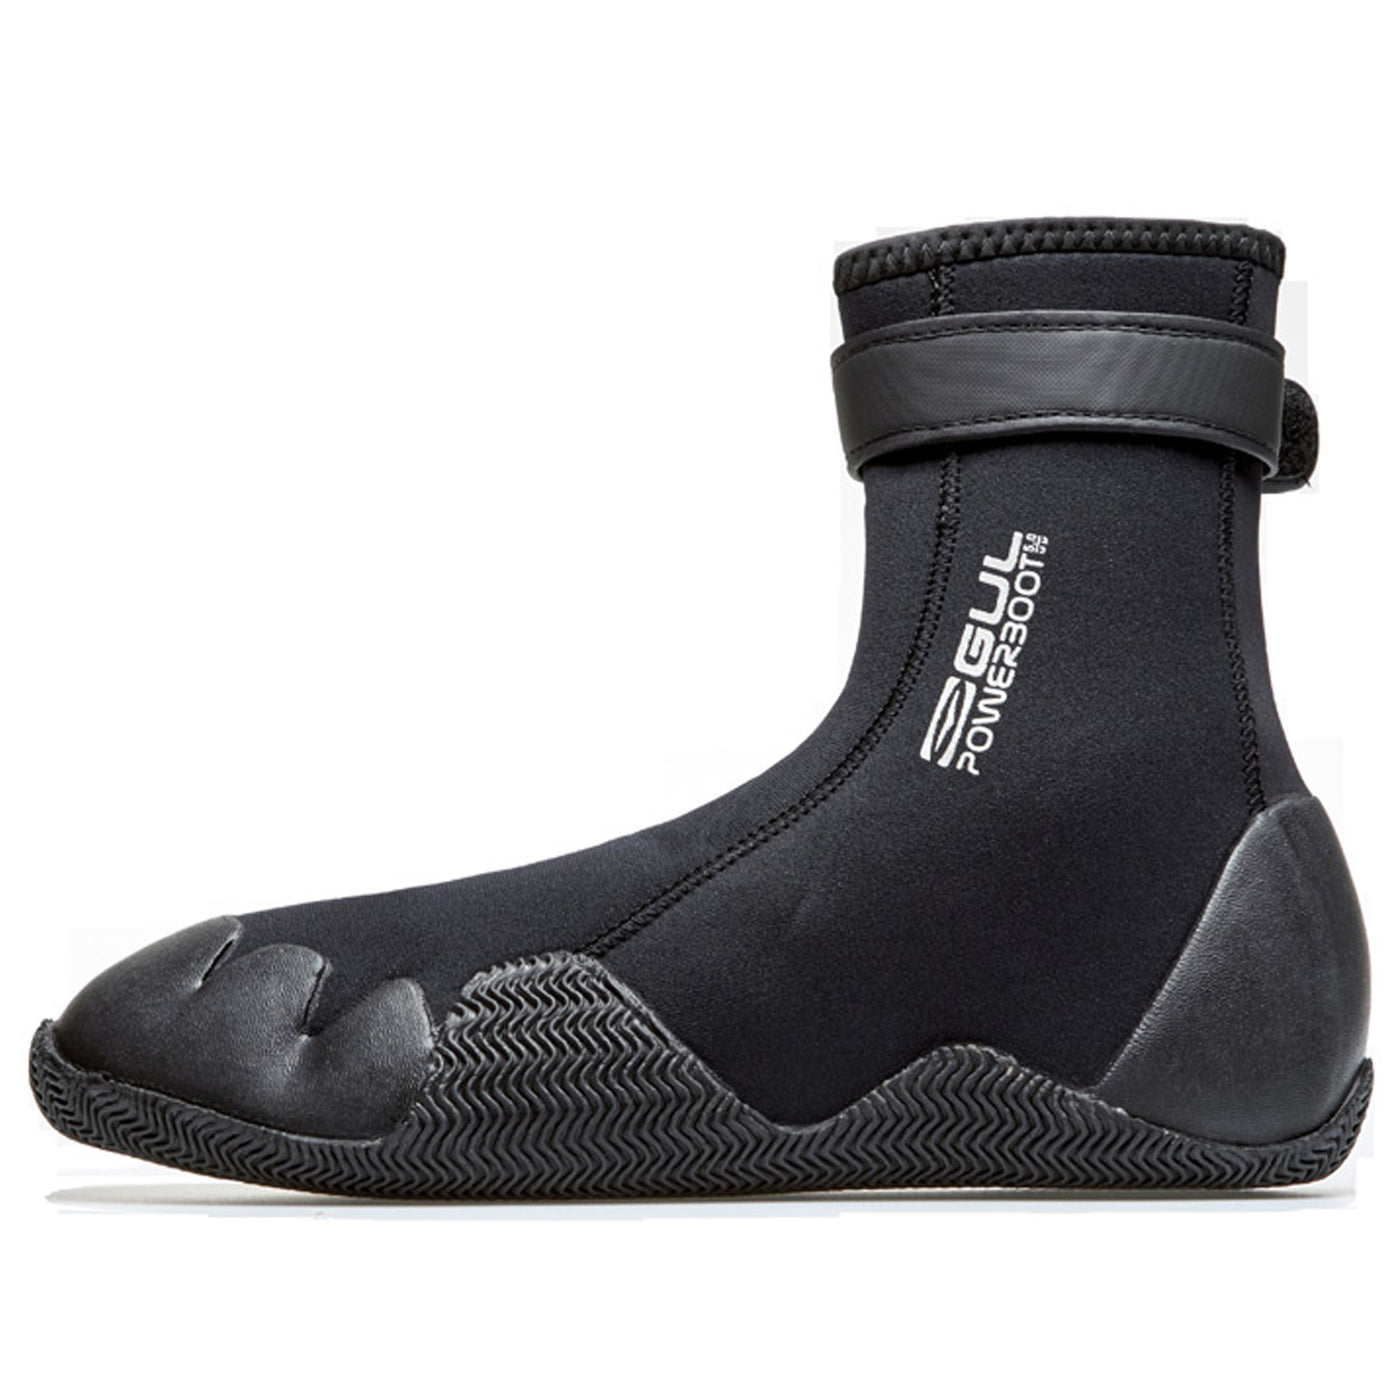 Wetsuit Accessories - Boots